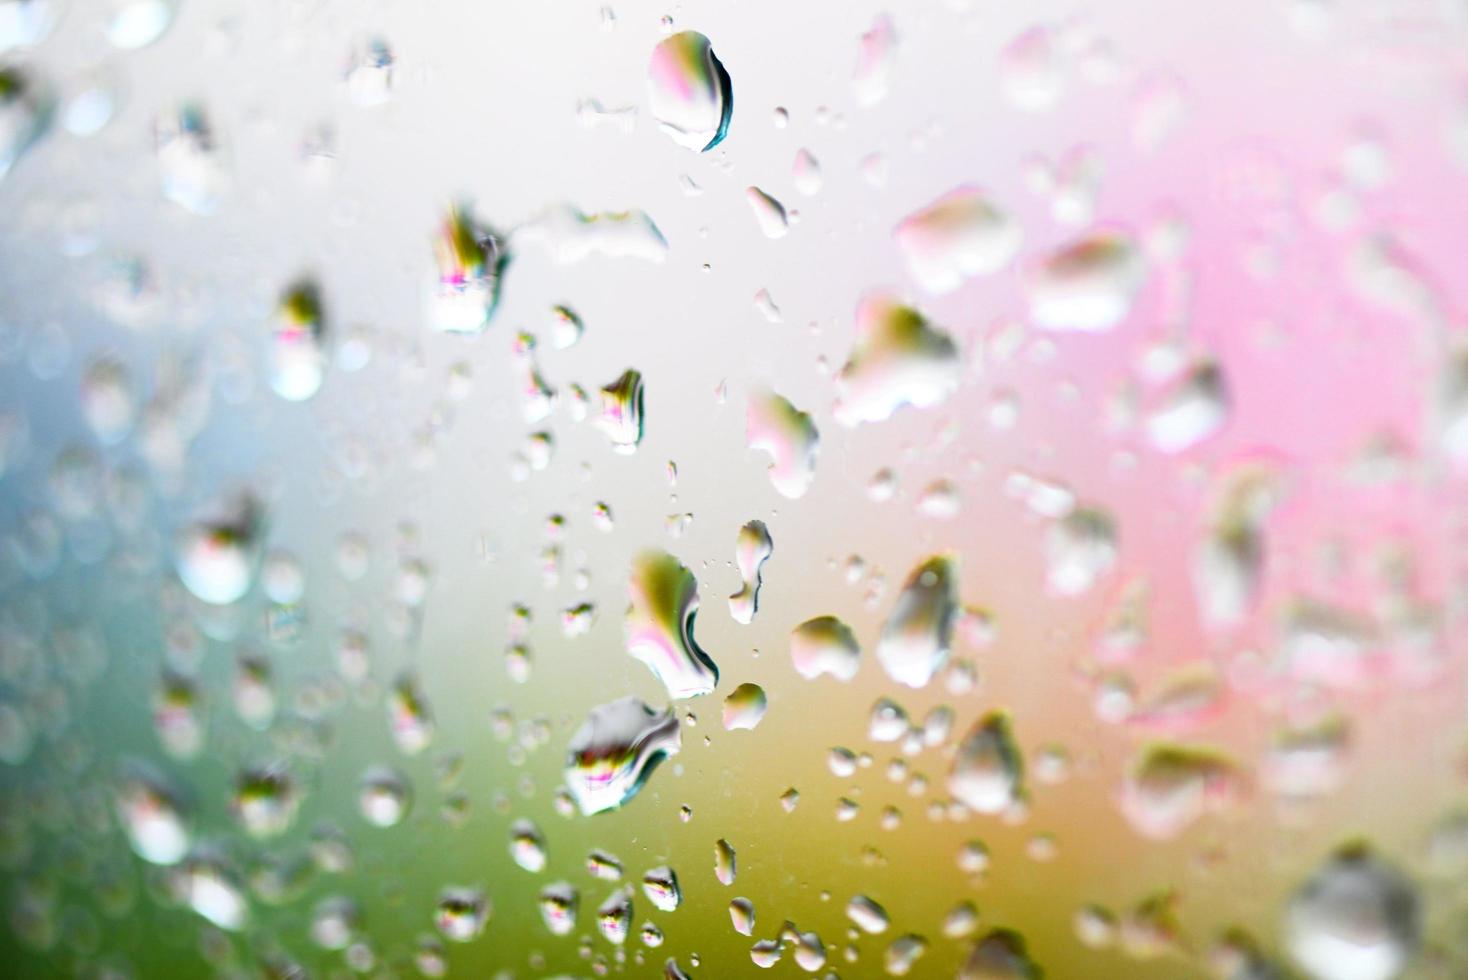 water drop glass background , nature water drop after rain , raindrops on glass window in the rainy season photo